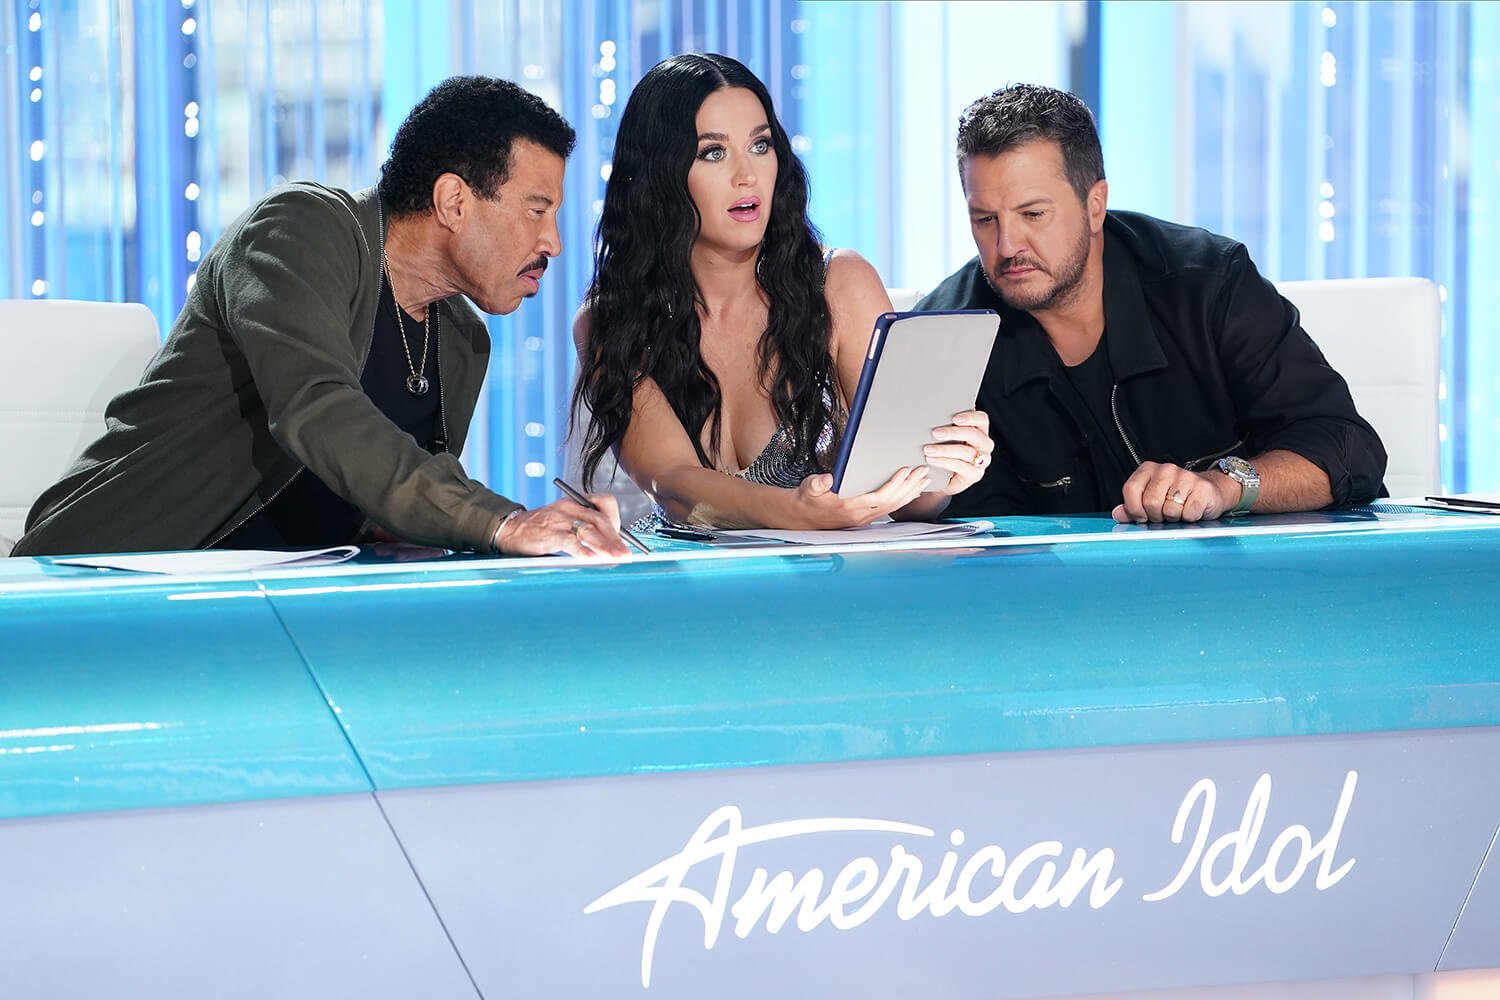 Many ‘American Idol’ Fans Are Fed Up with ‘Sob Story’ Audition Format — Here’s How It Should Change